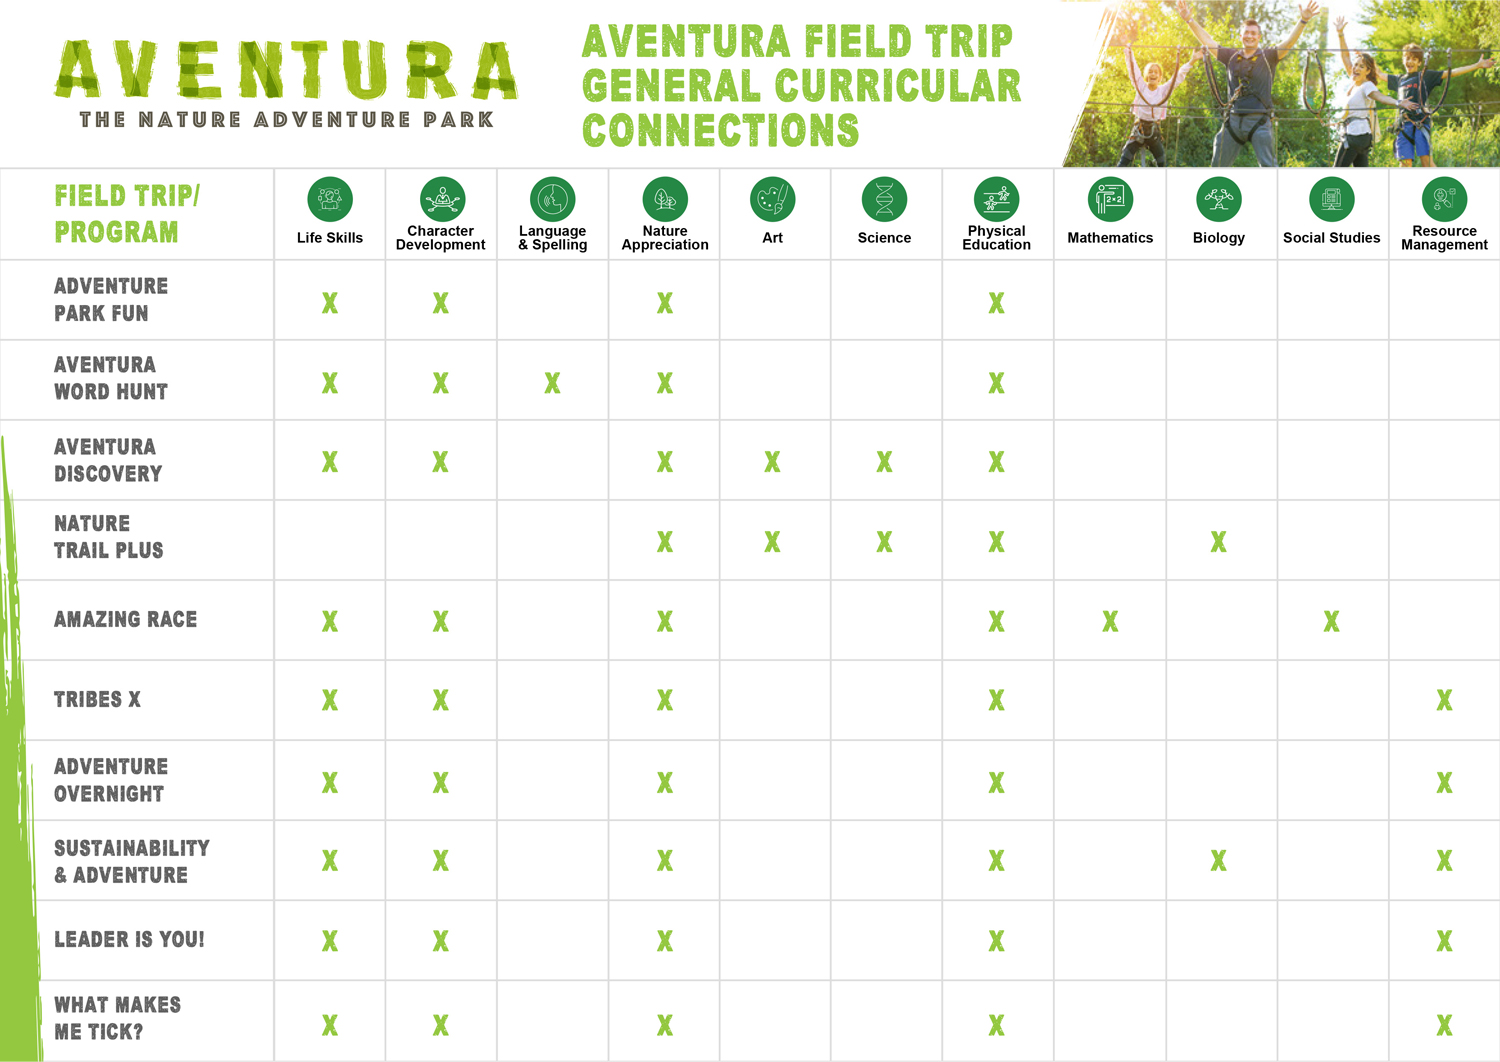 Aventura_Field_Trip_General_Curricular_Connections